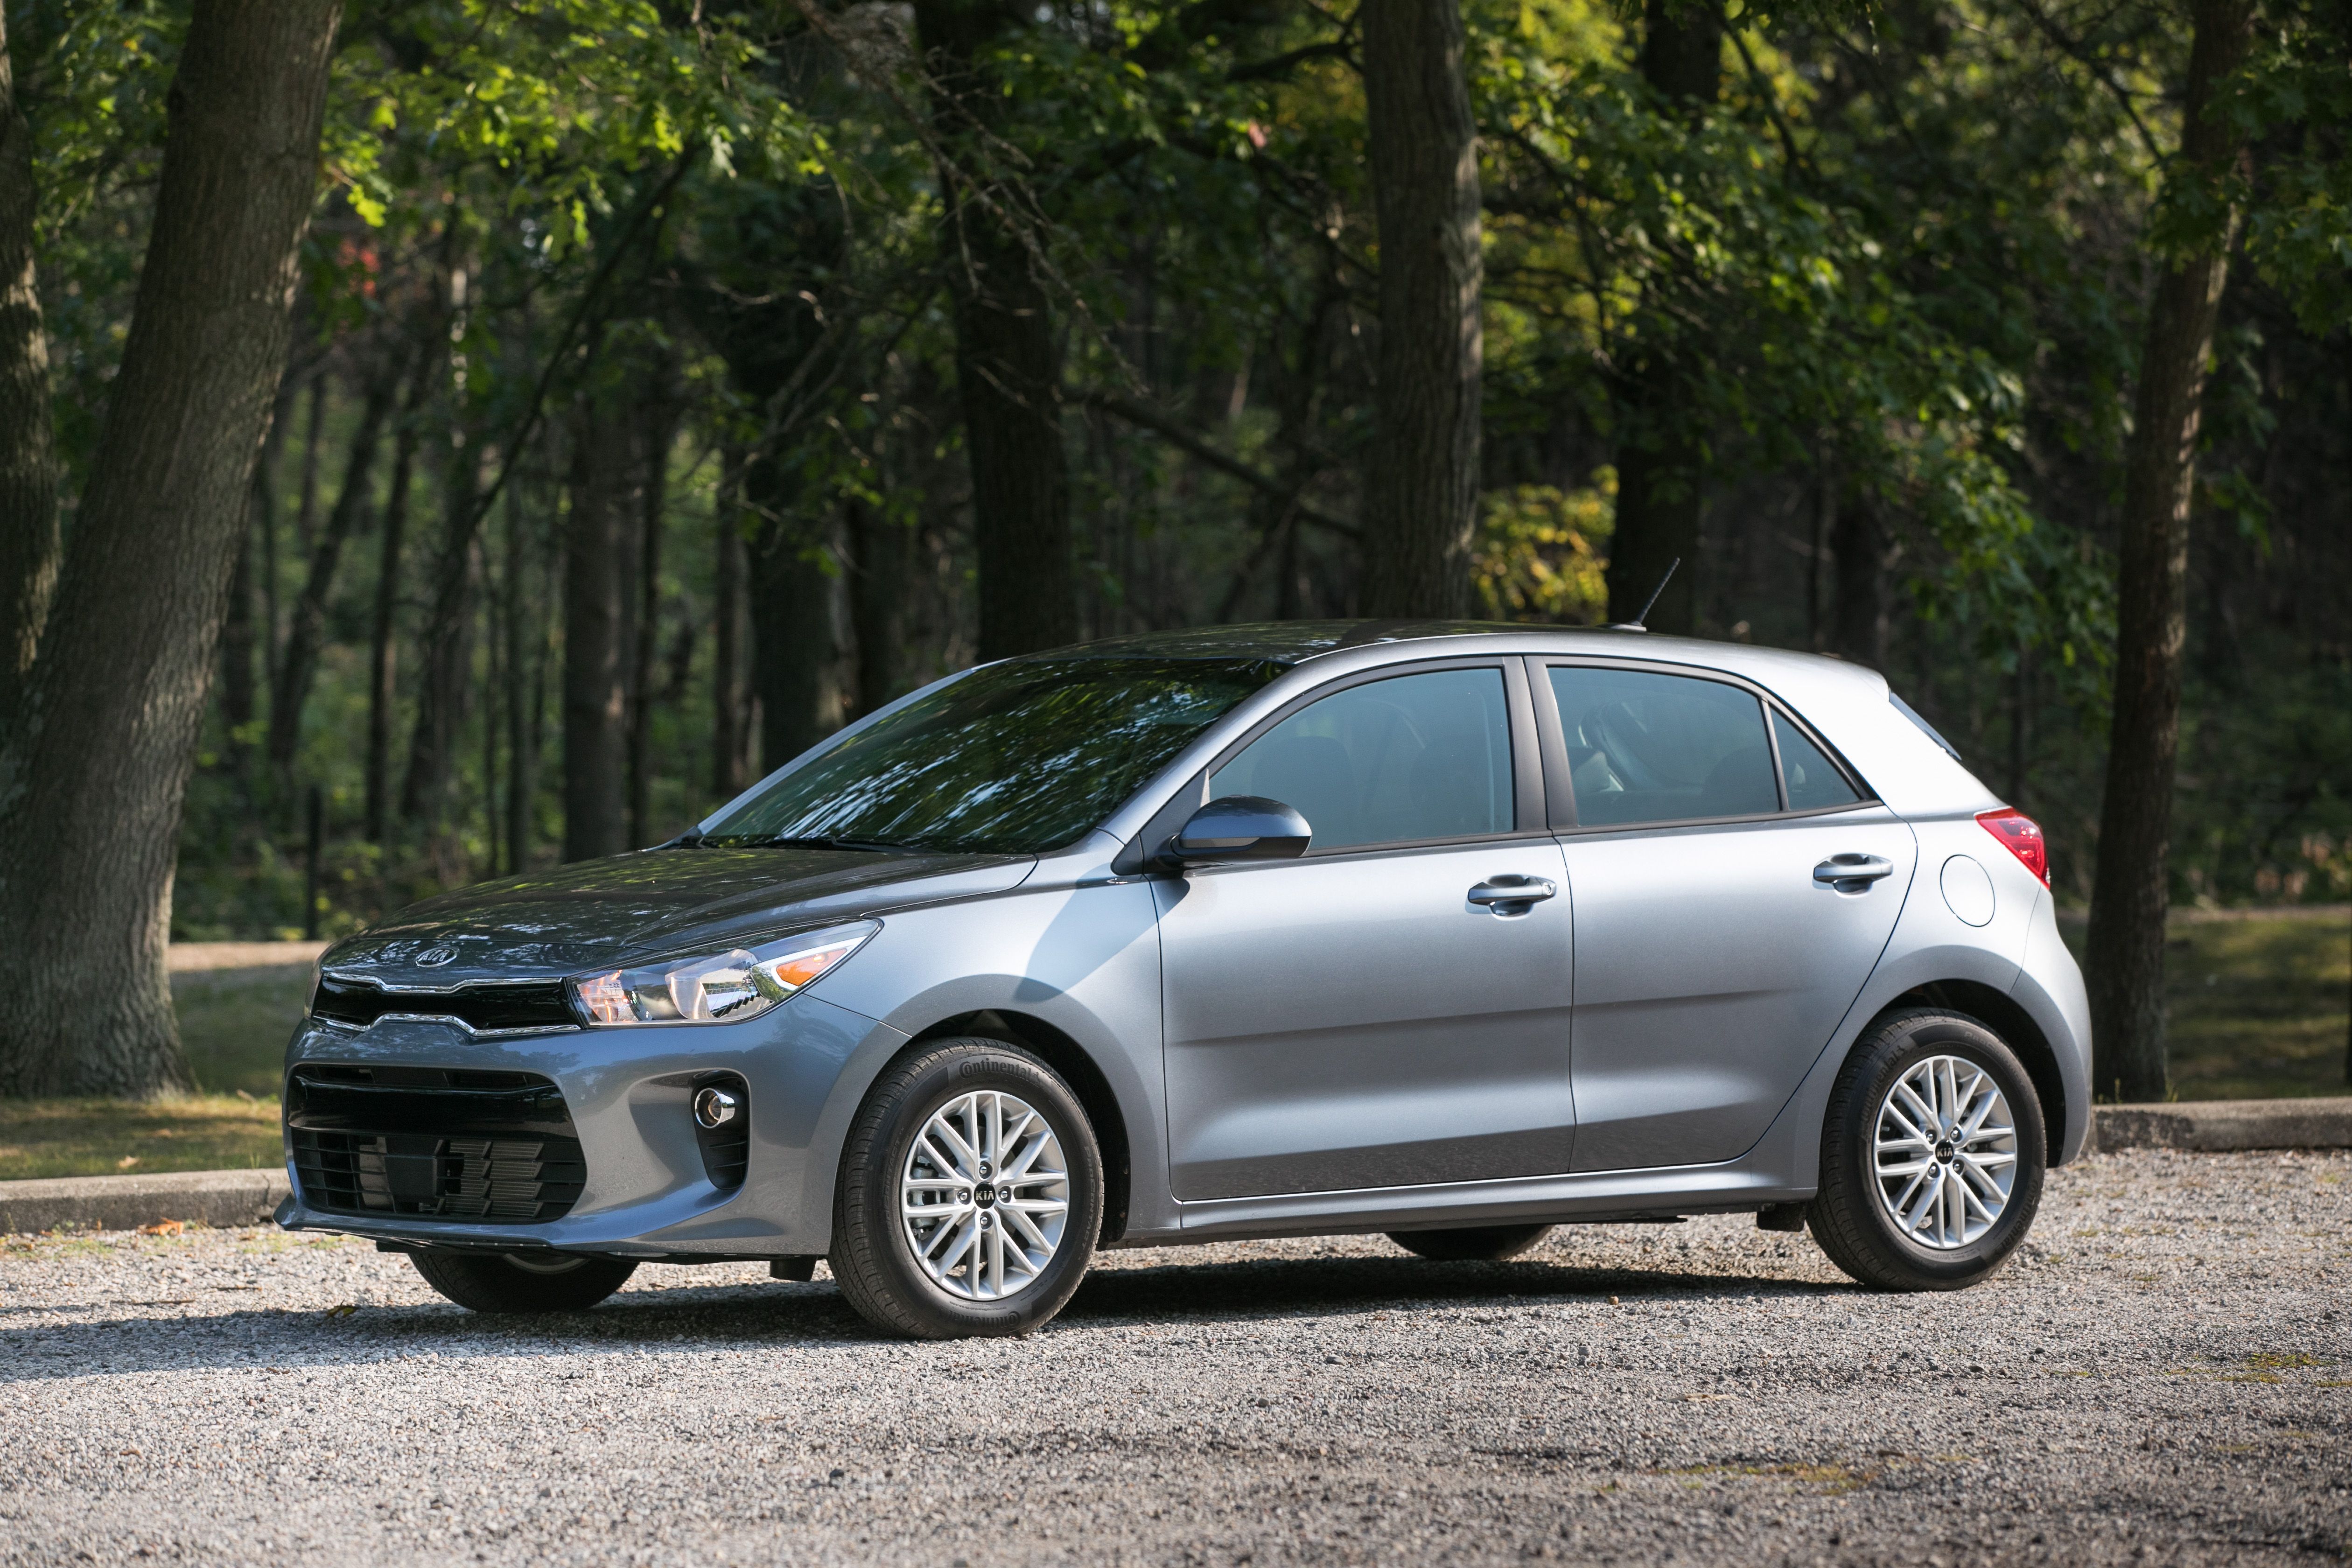 betalingsmiddel areal Gravere 2019 Kia Rio Review, Pricing, and Specs